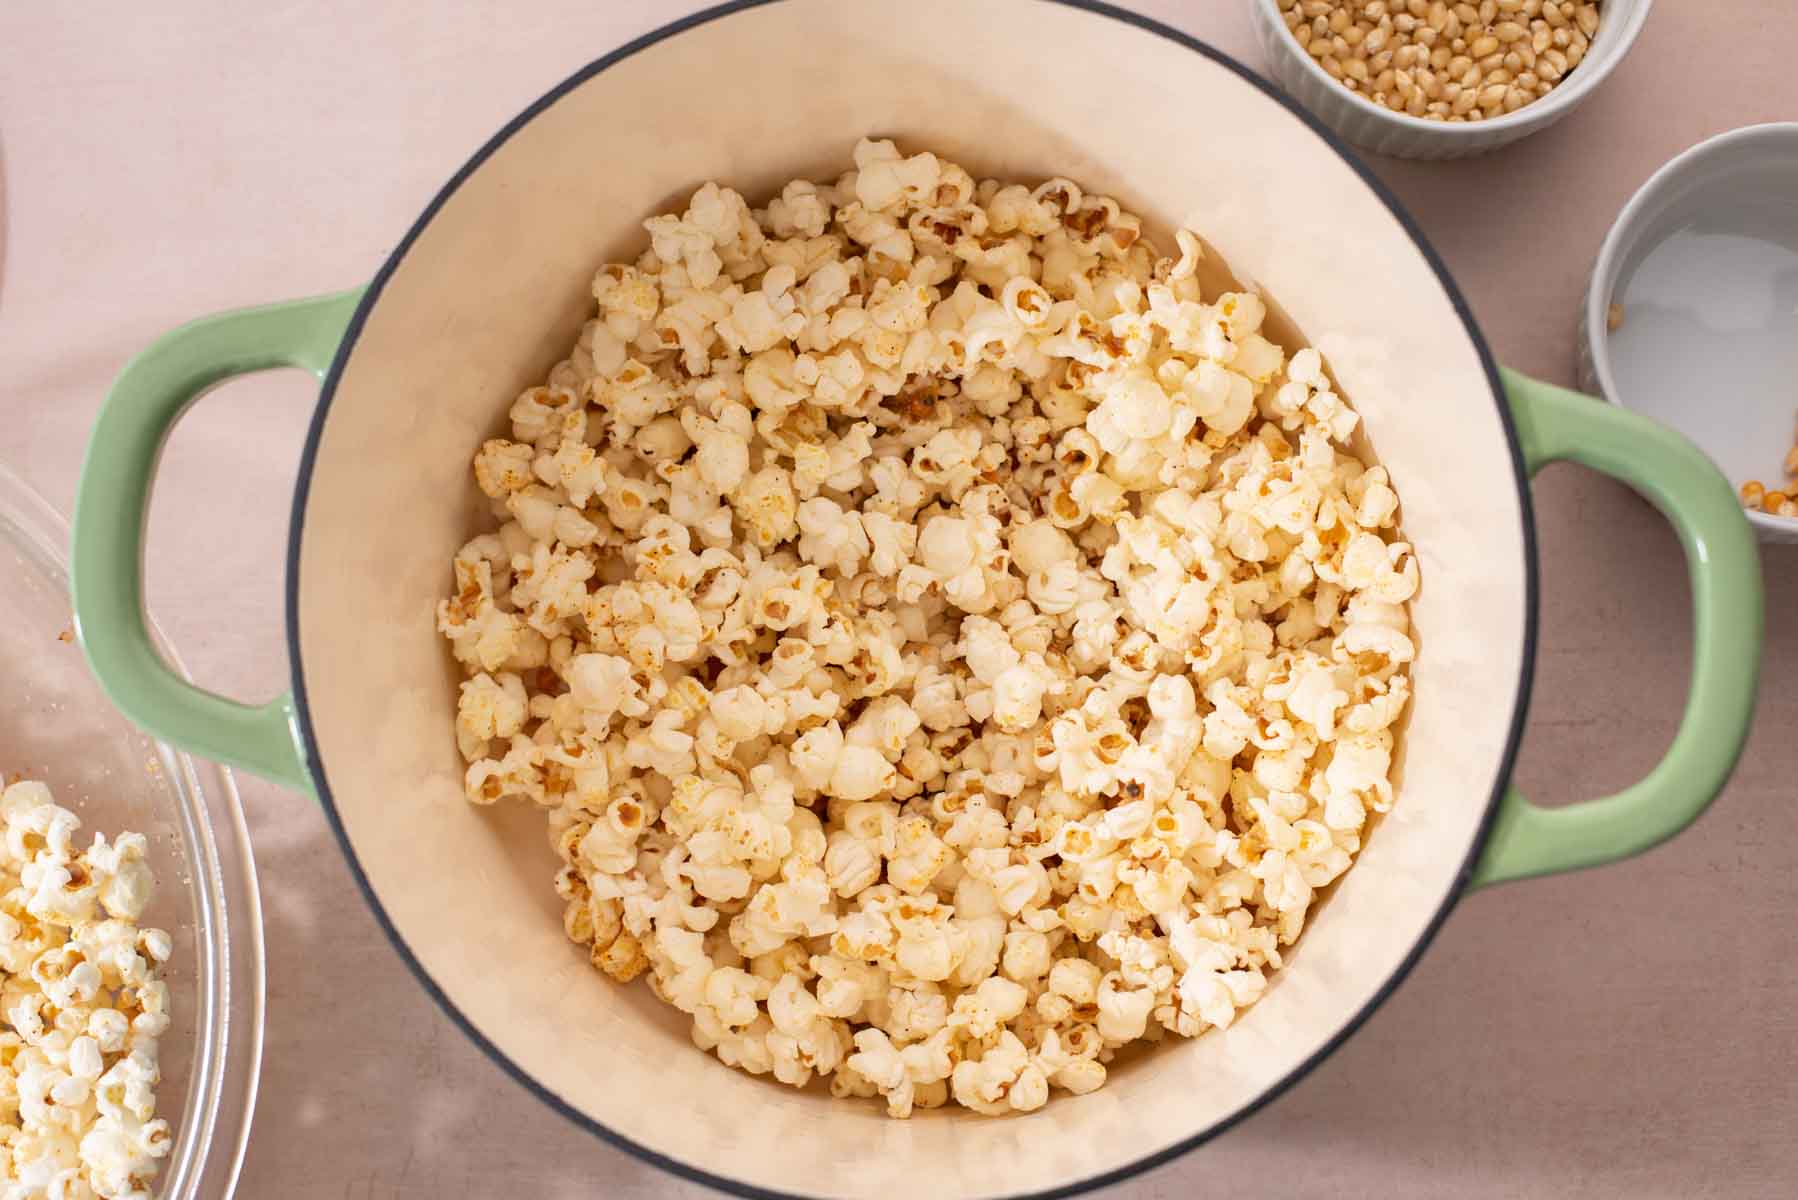 Large green Dutch oven filled with popped popcorn.